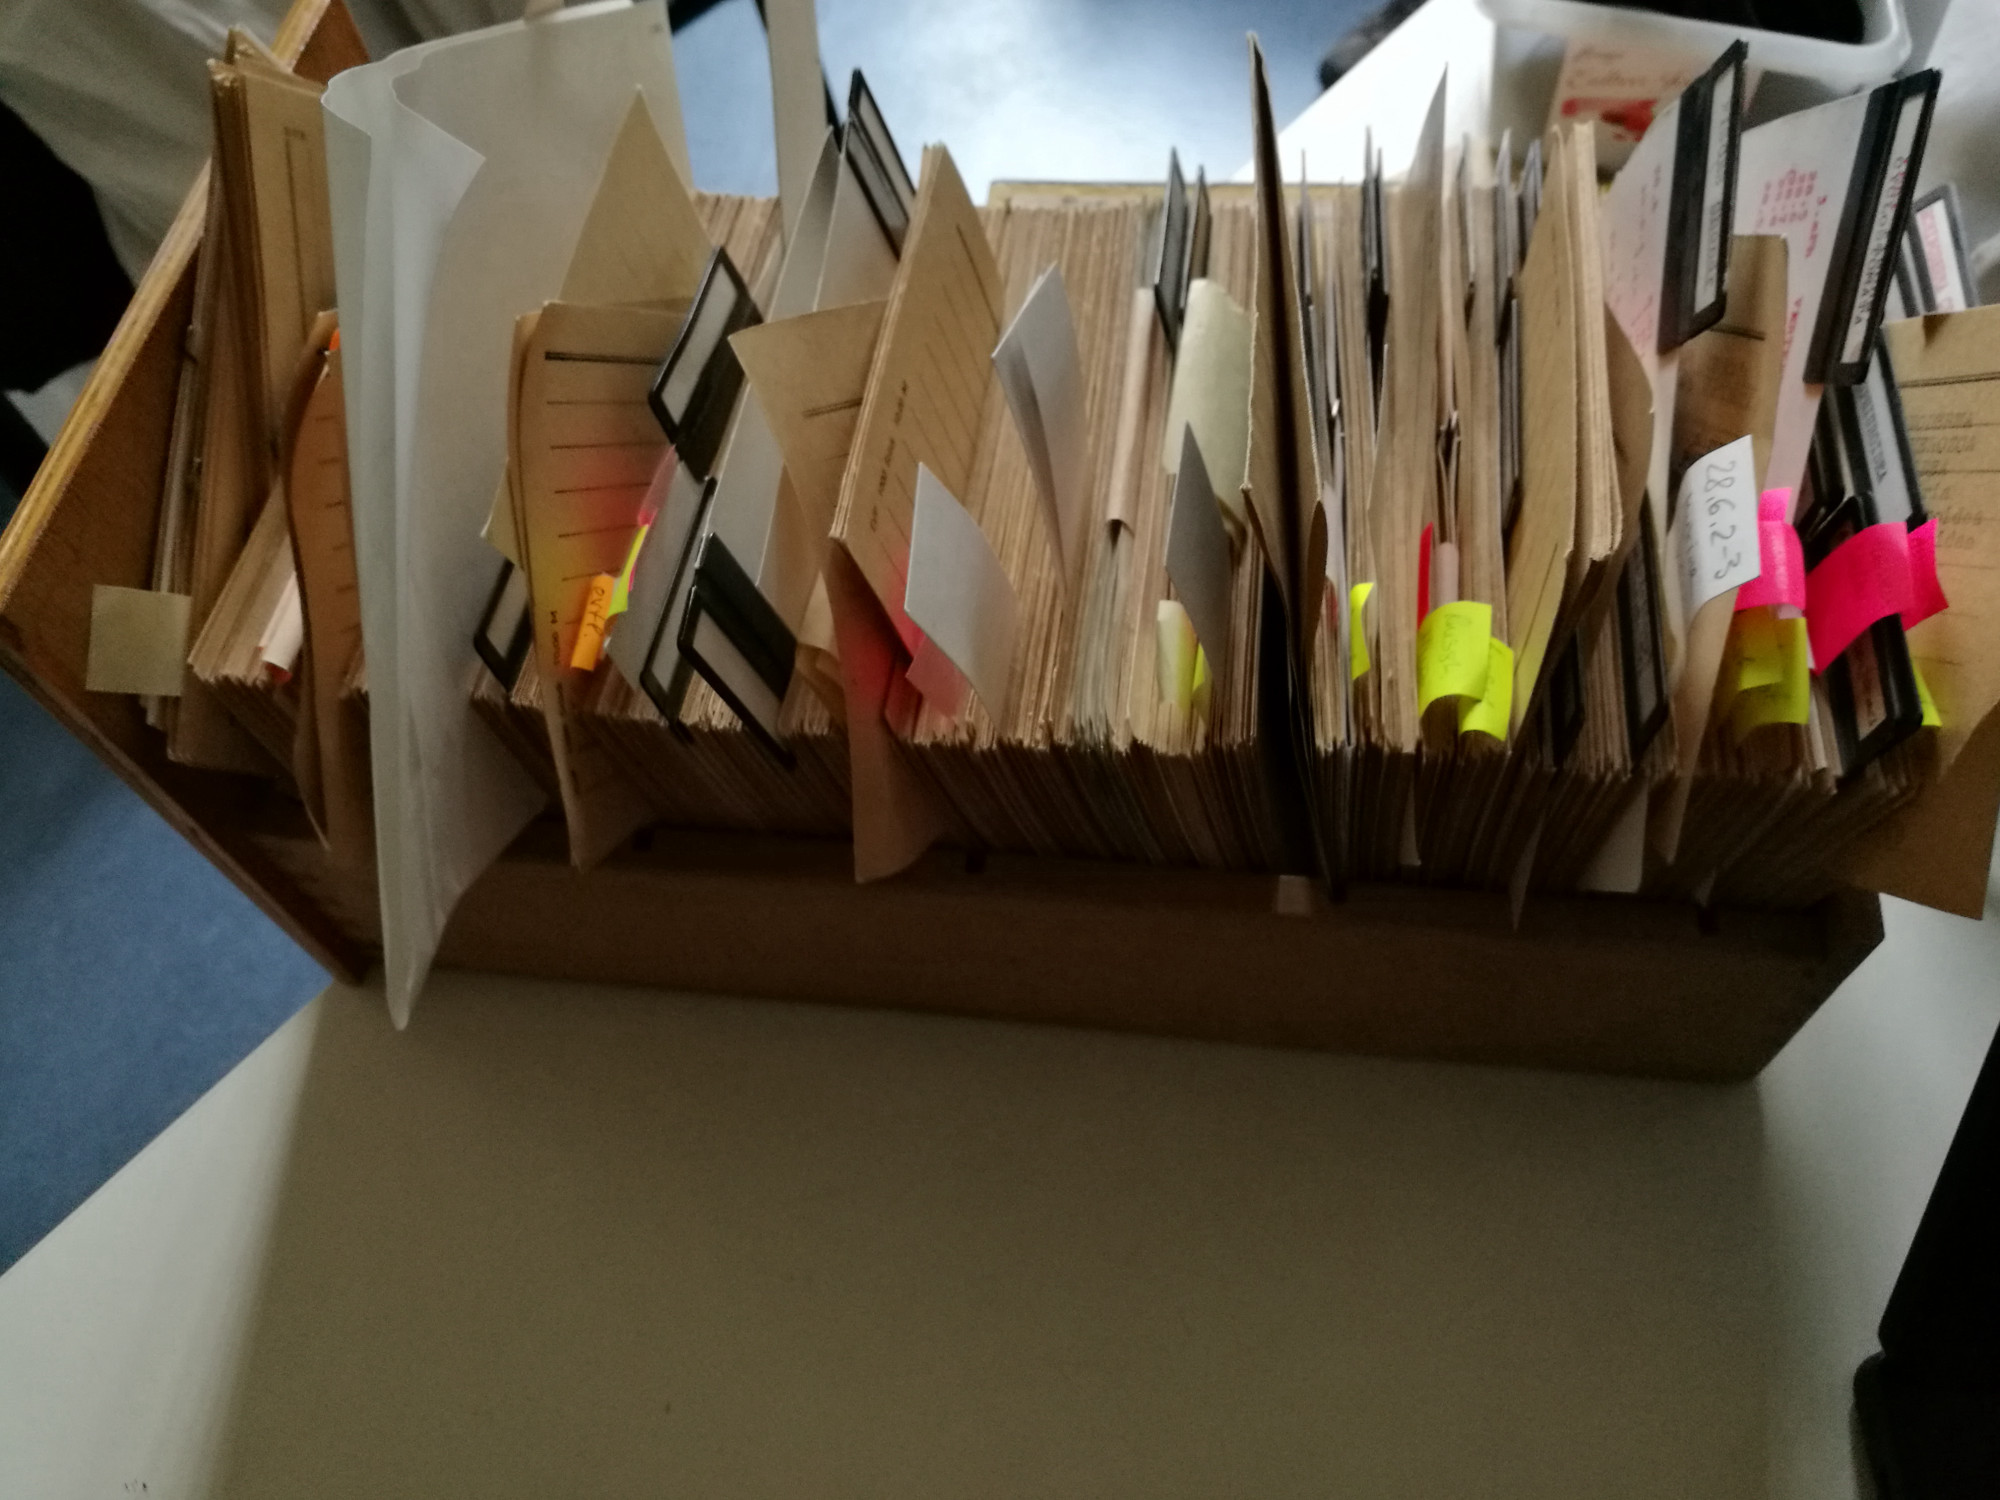 Drawer photographed from above holding hundreds of index cards lined up in the box. Some are annotated with post-its and other notes, and left to peek out, while most are tightly lined up.